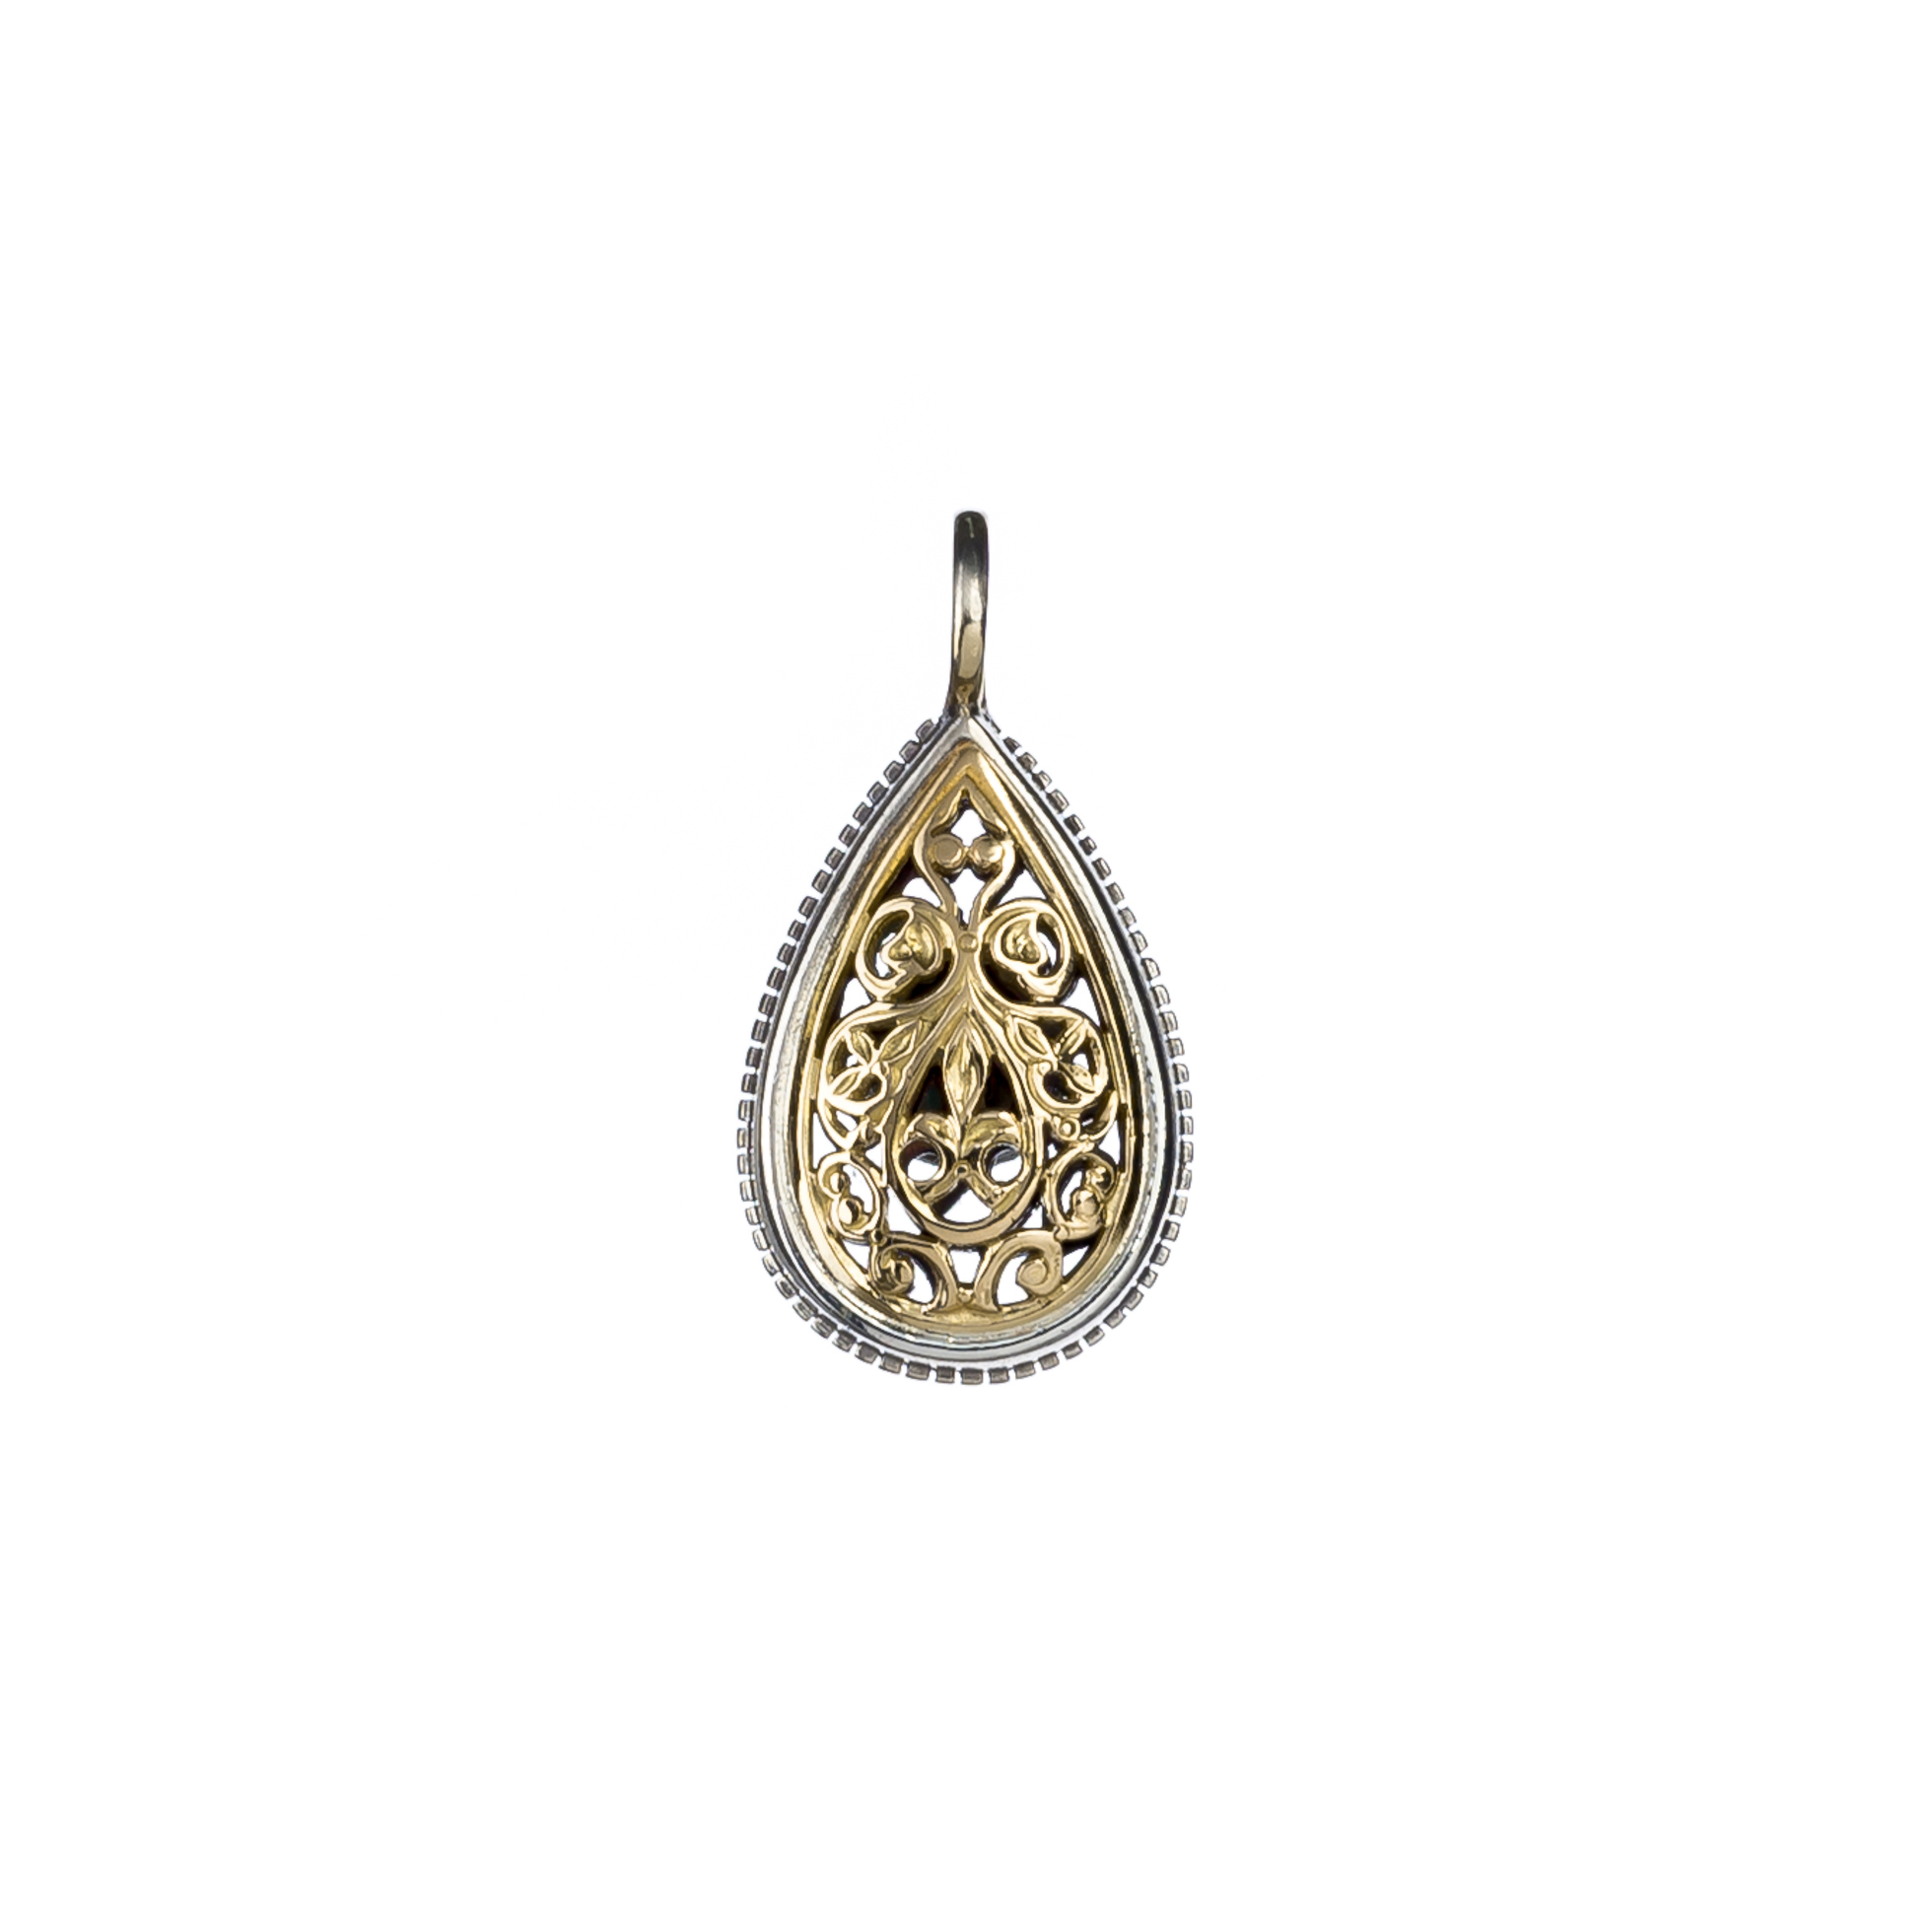 Garden shadows drop pendant in 18K Gold and Sterling Silver